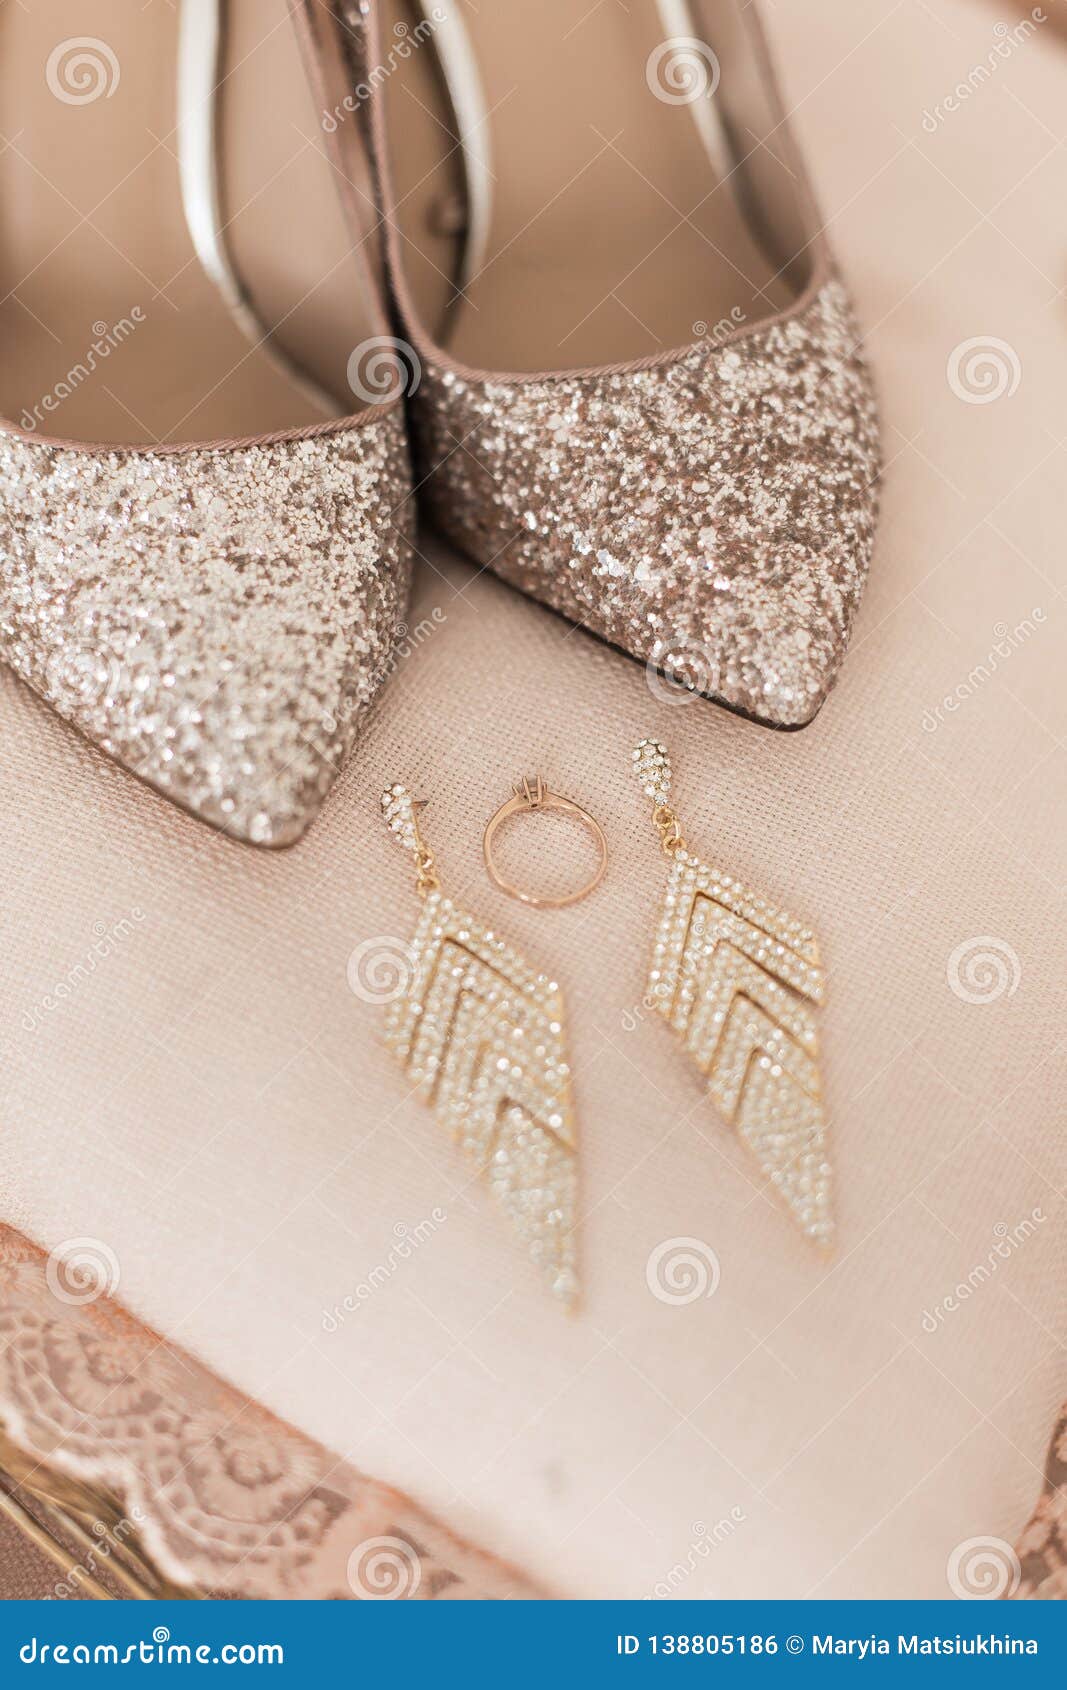 Blush Pink Bridal Shoes And Accenting 